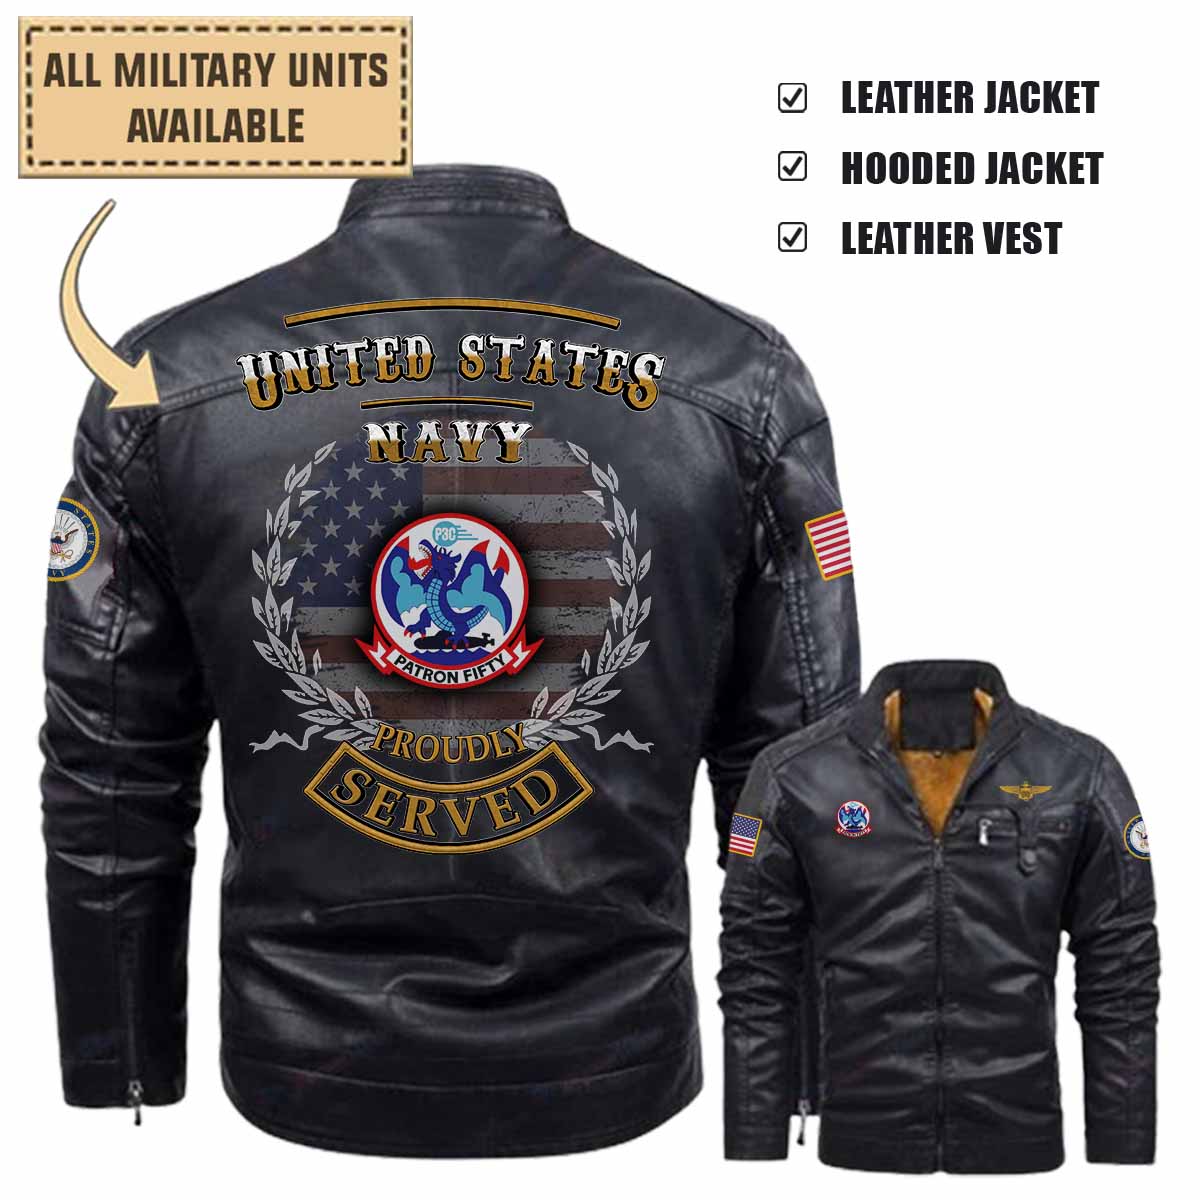 VP-50 Blue Dragons P3C_Military Leather Jacket and Vest